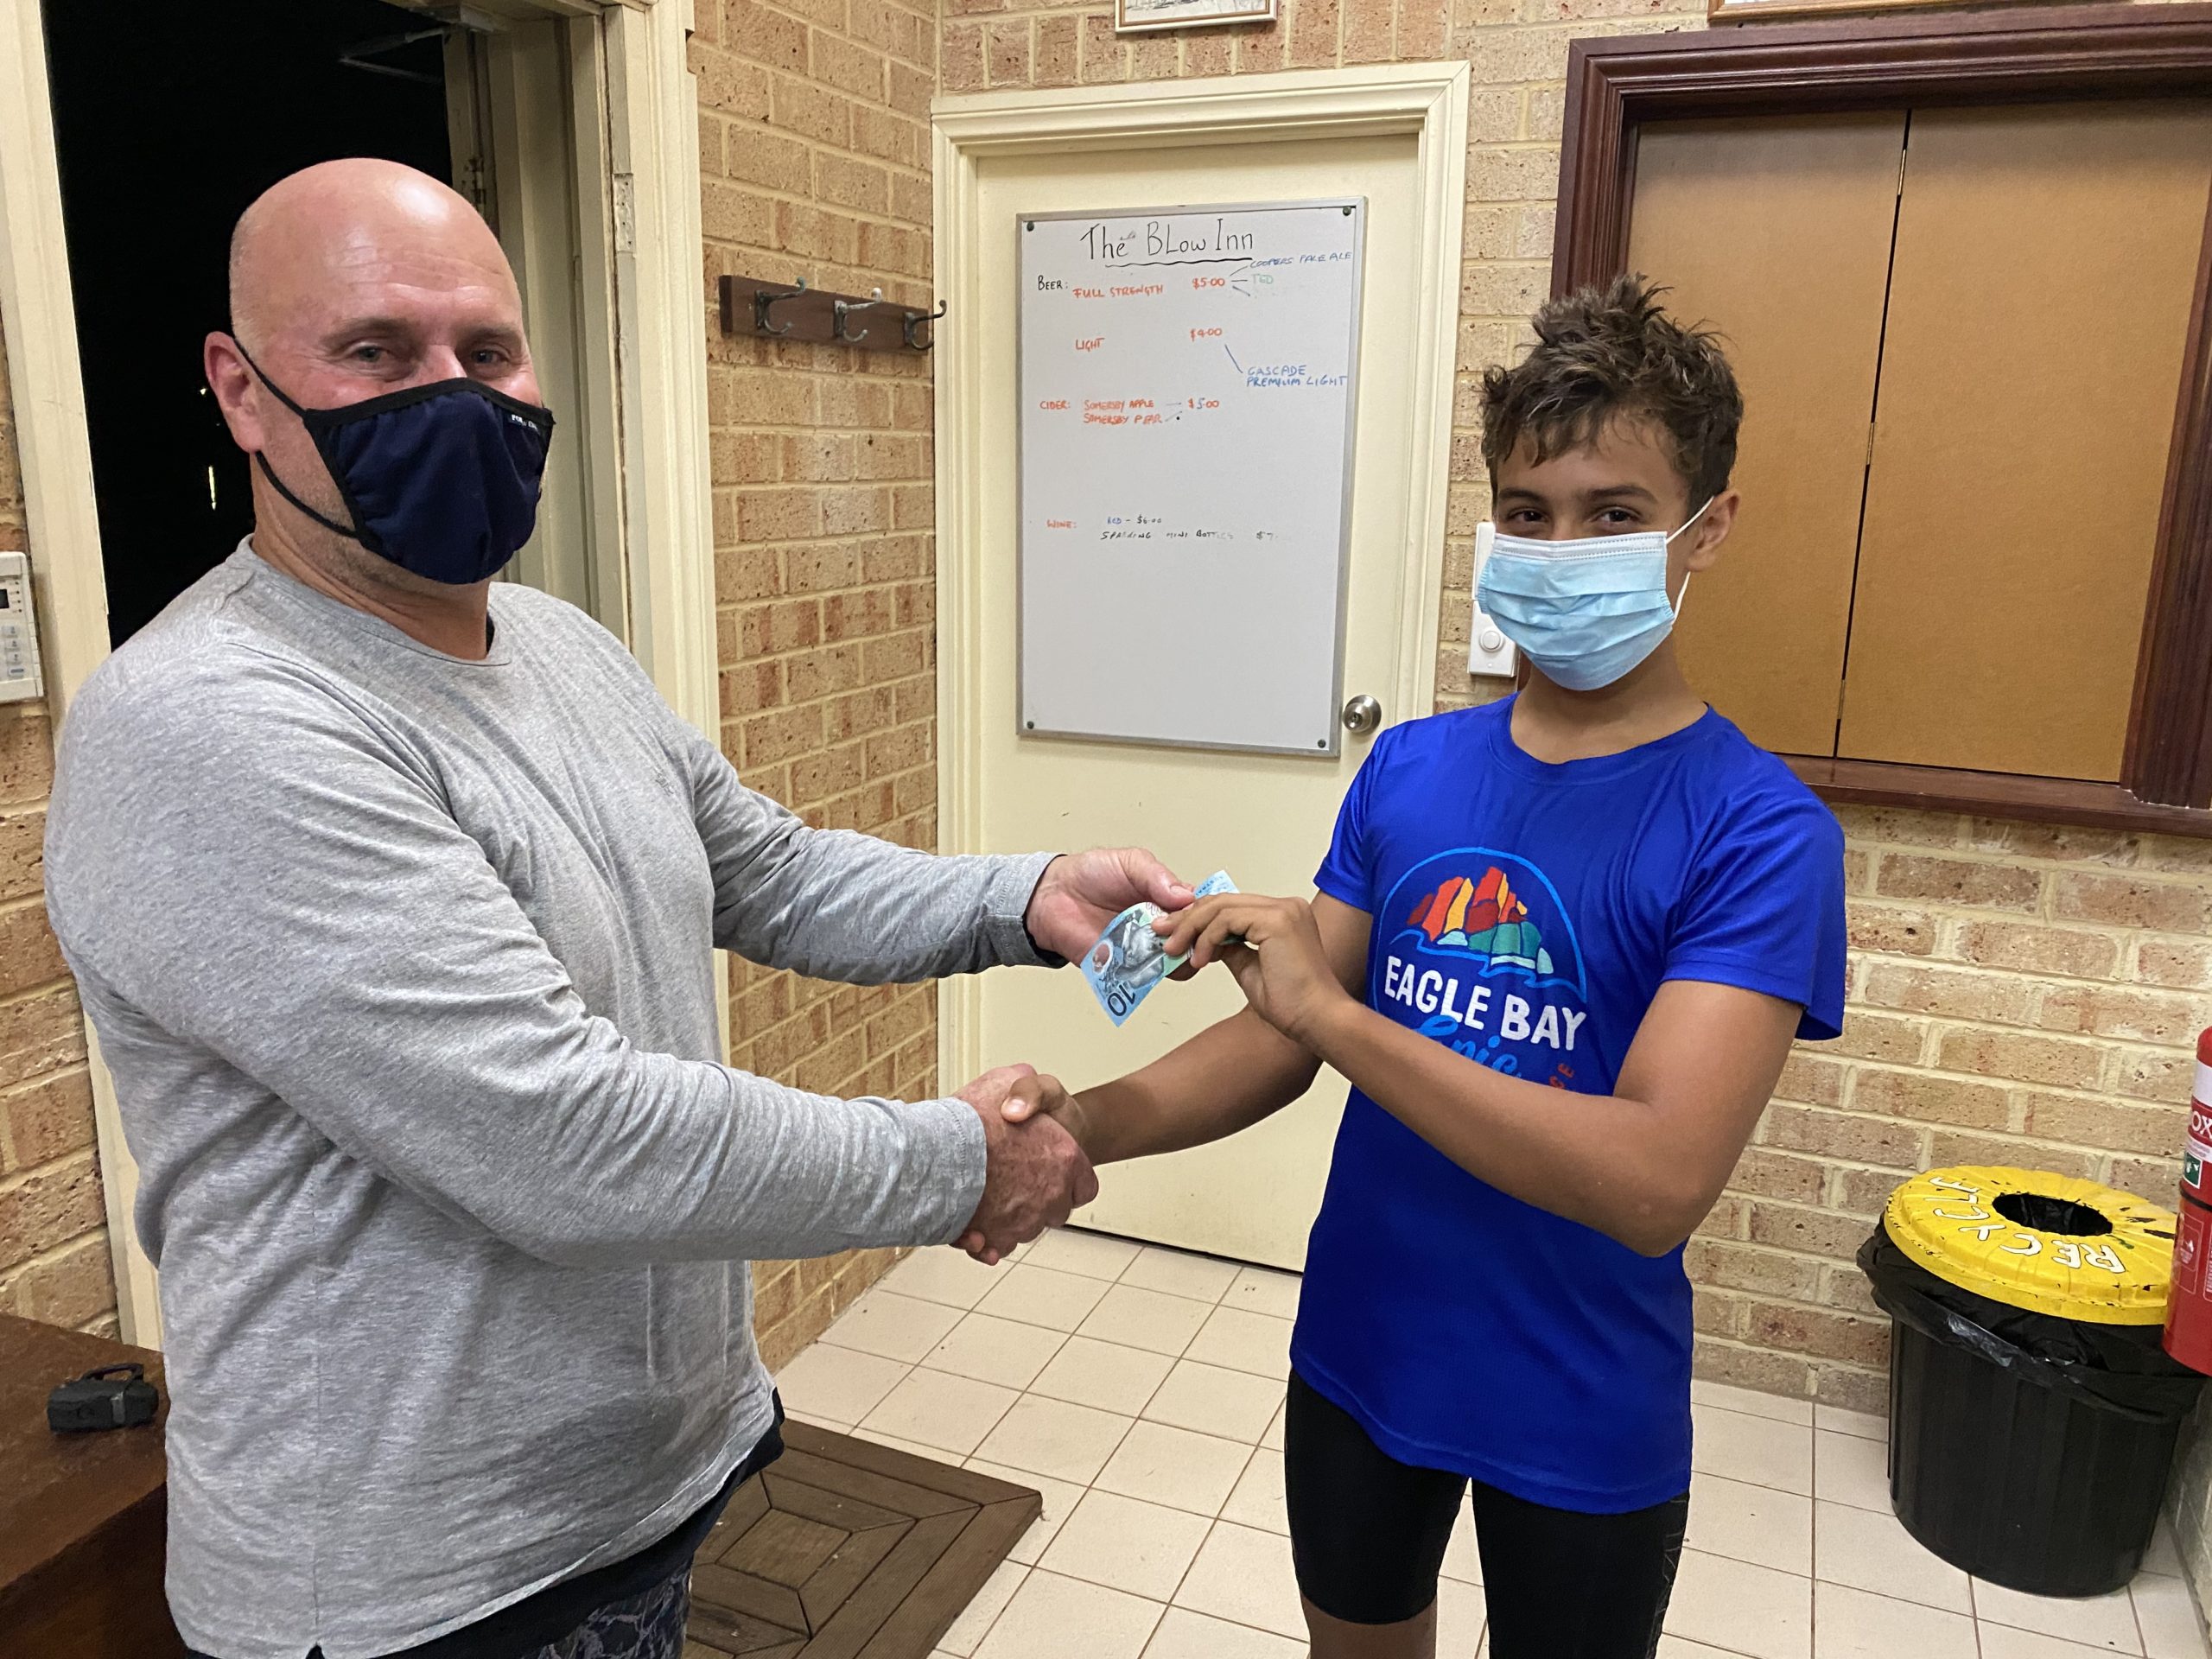 Tuesday 27th April 2021 : Tonight’s photo shows club member Peter Burge presenting tonight’s winner Connor Jacob with a $10 note.